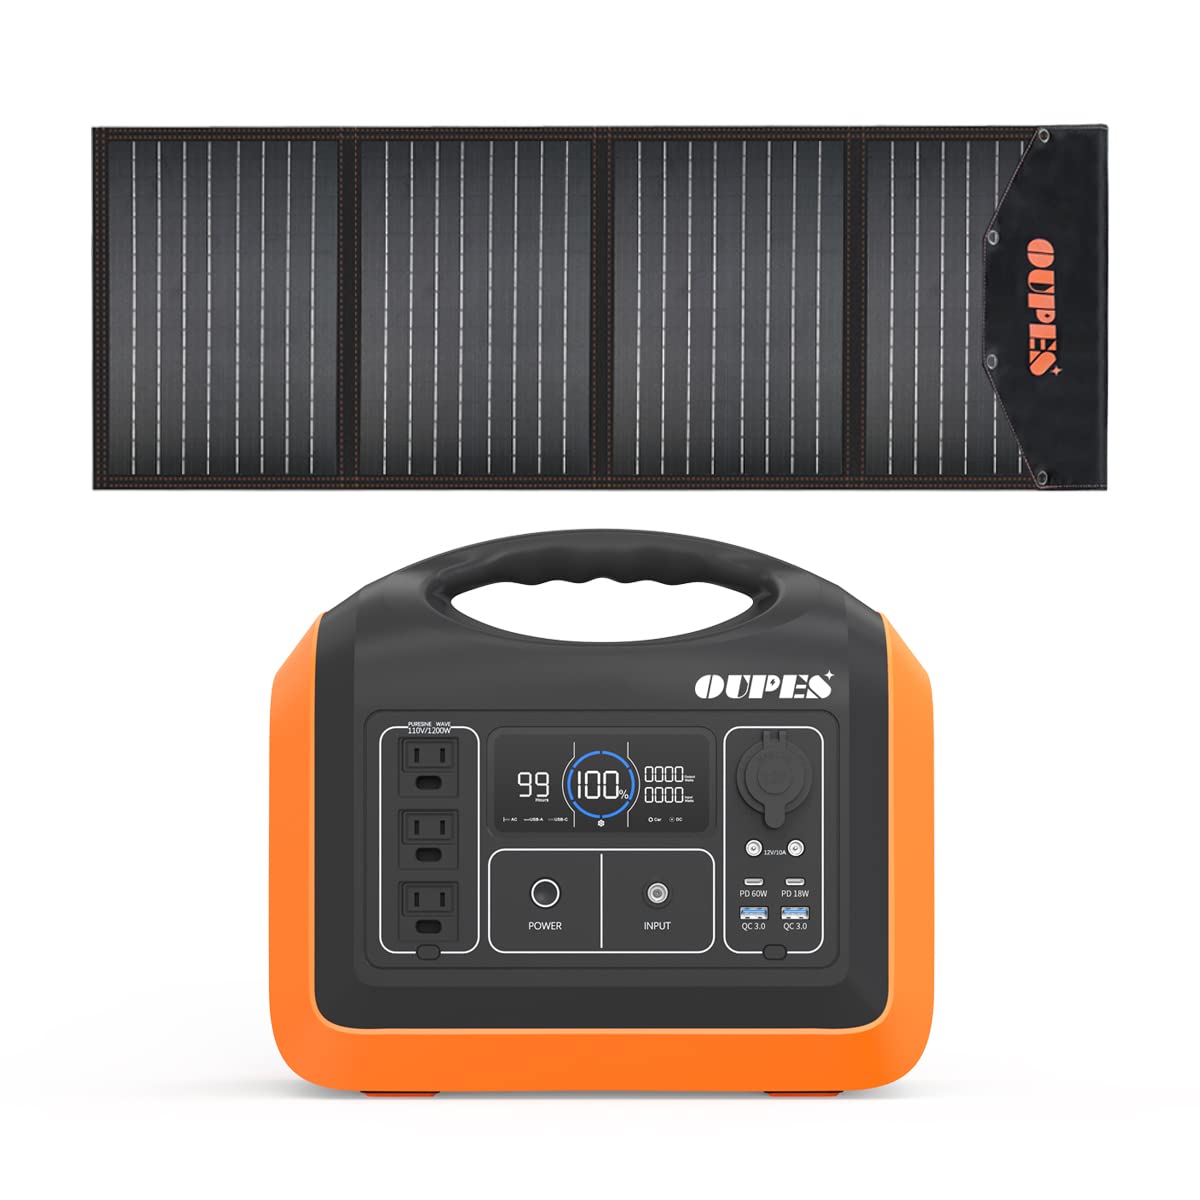 OUPES 1200W Portable Power Station with 100W Solar Panel, Solar Generator 992Wh LiFePO4 Backup with 10 Output Ports(3600W Peak), Outdoor Power Generator for Camping Travel Emergency